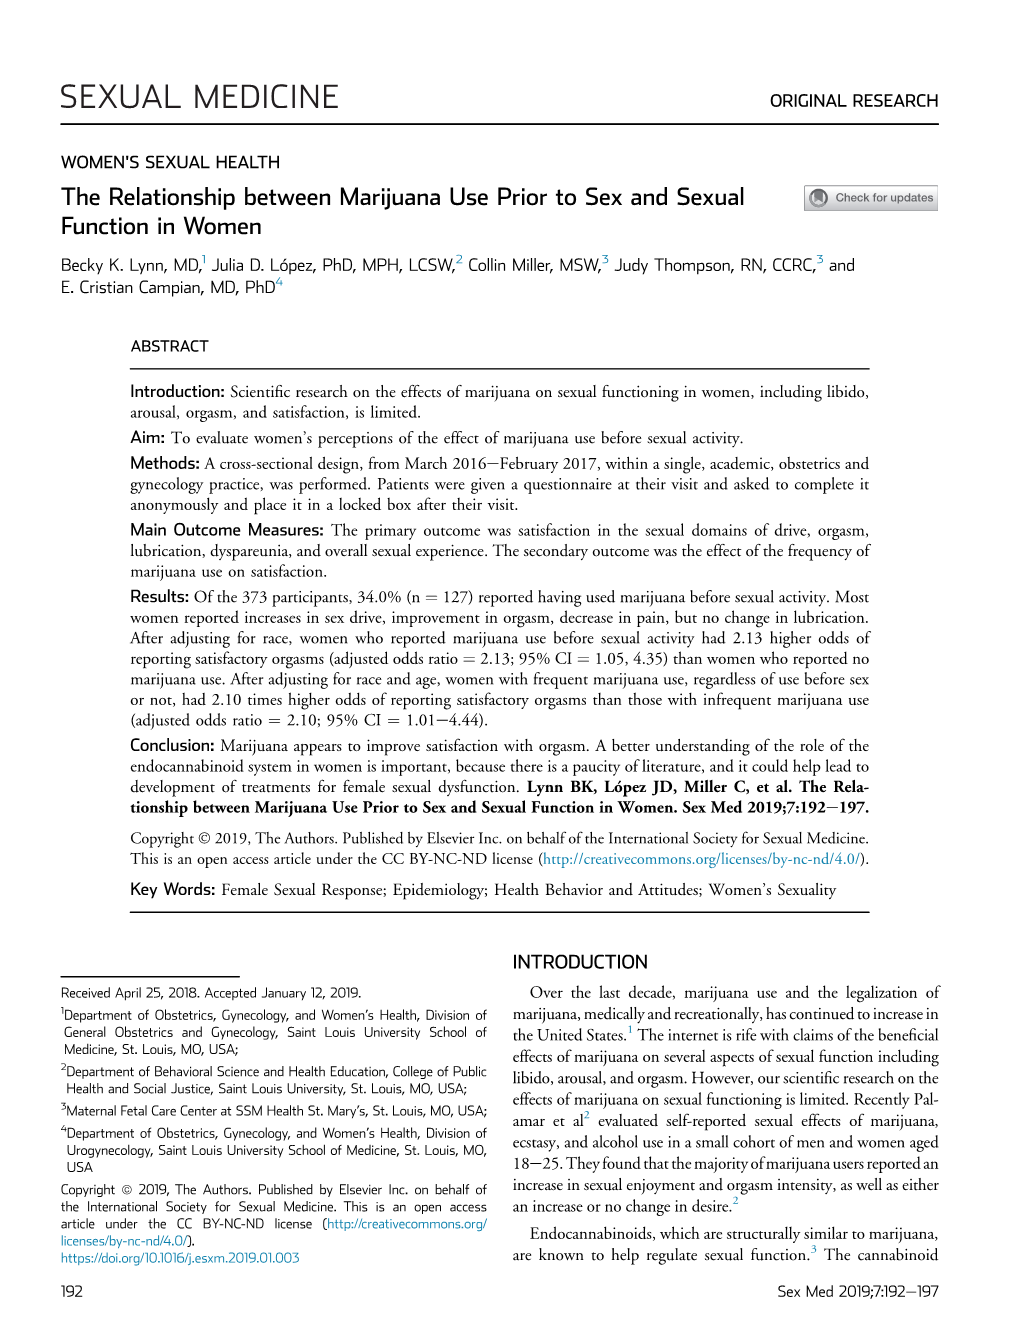 The Relationship Between Marijuana Use Prior to Sex and Sexual Function in Women